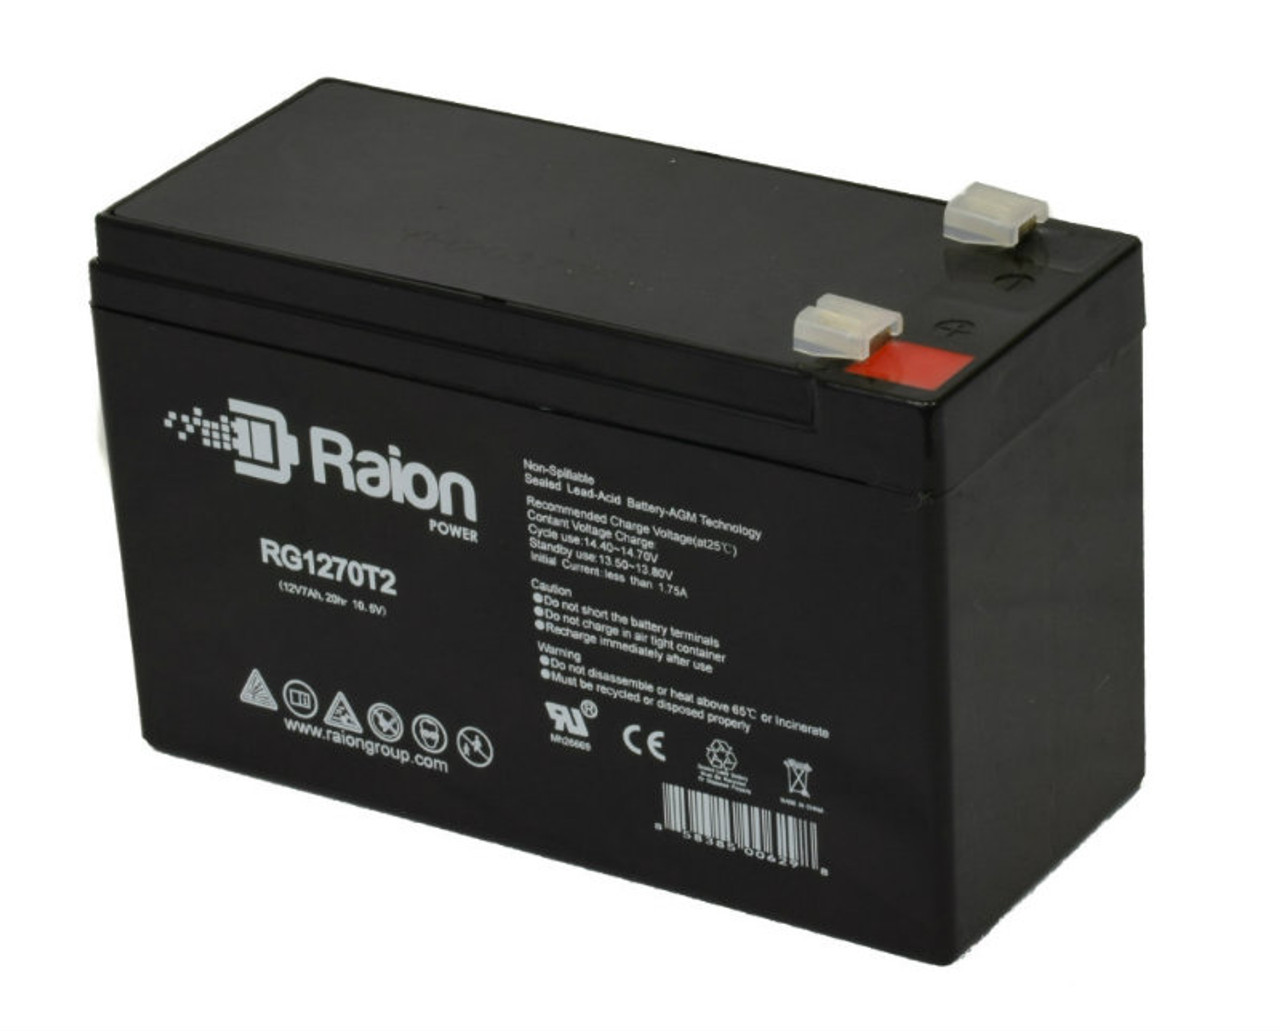 Raion Power RG1270T1 12V 7Ah Non-Spillable Replacement Battery for Kweight Power KW 12-7